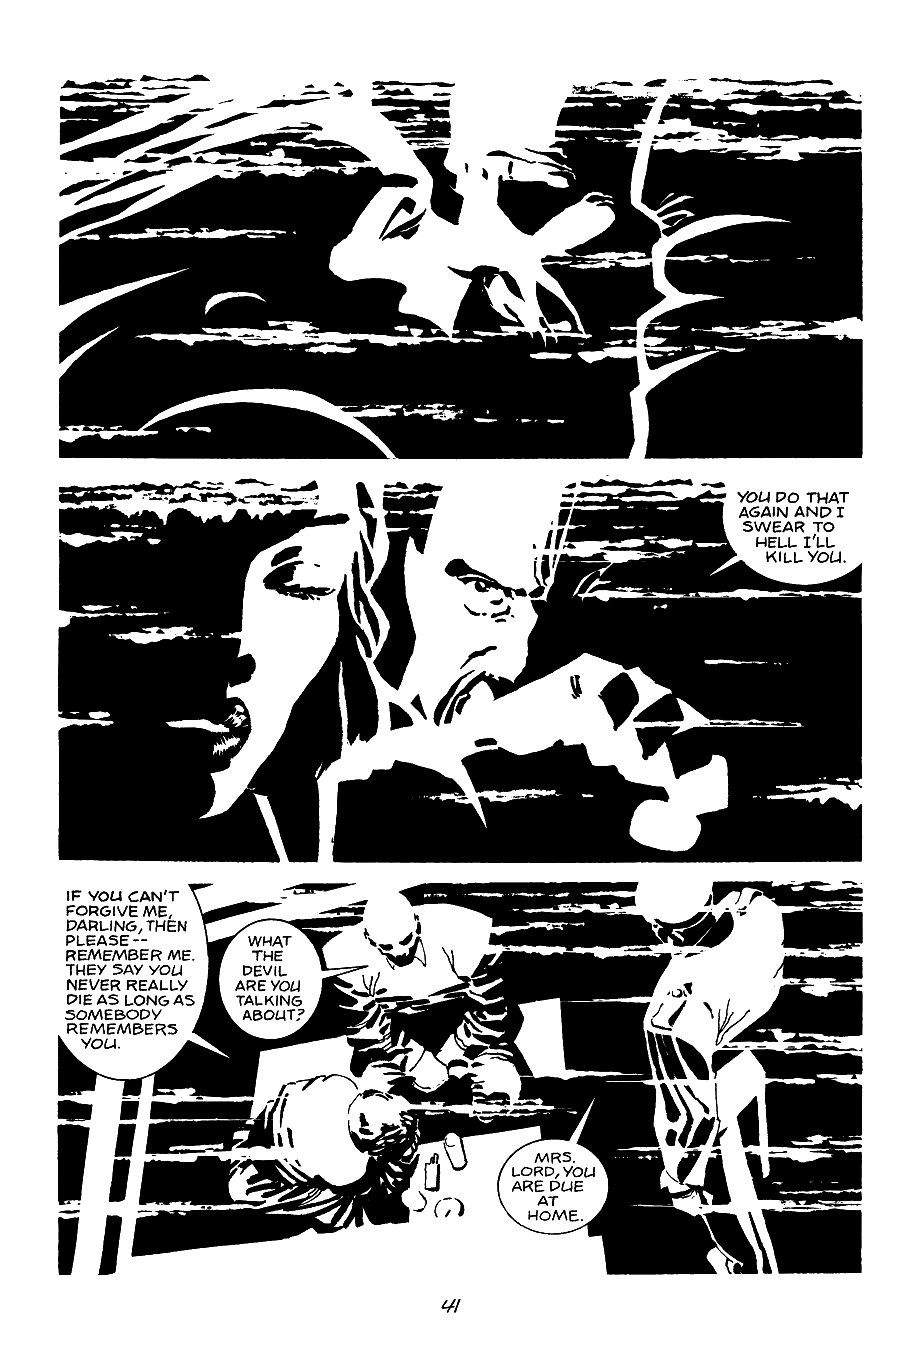 page 41 of sin city 2 the hard goodbye